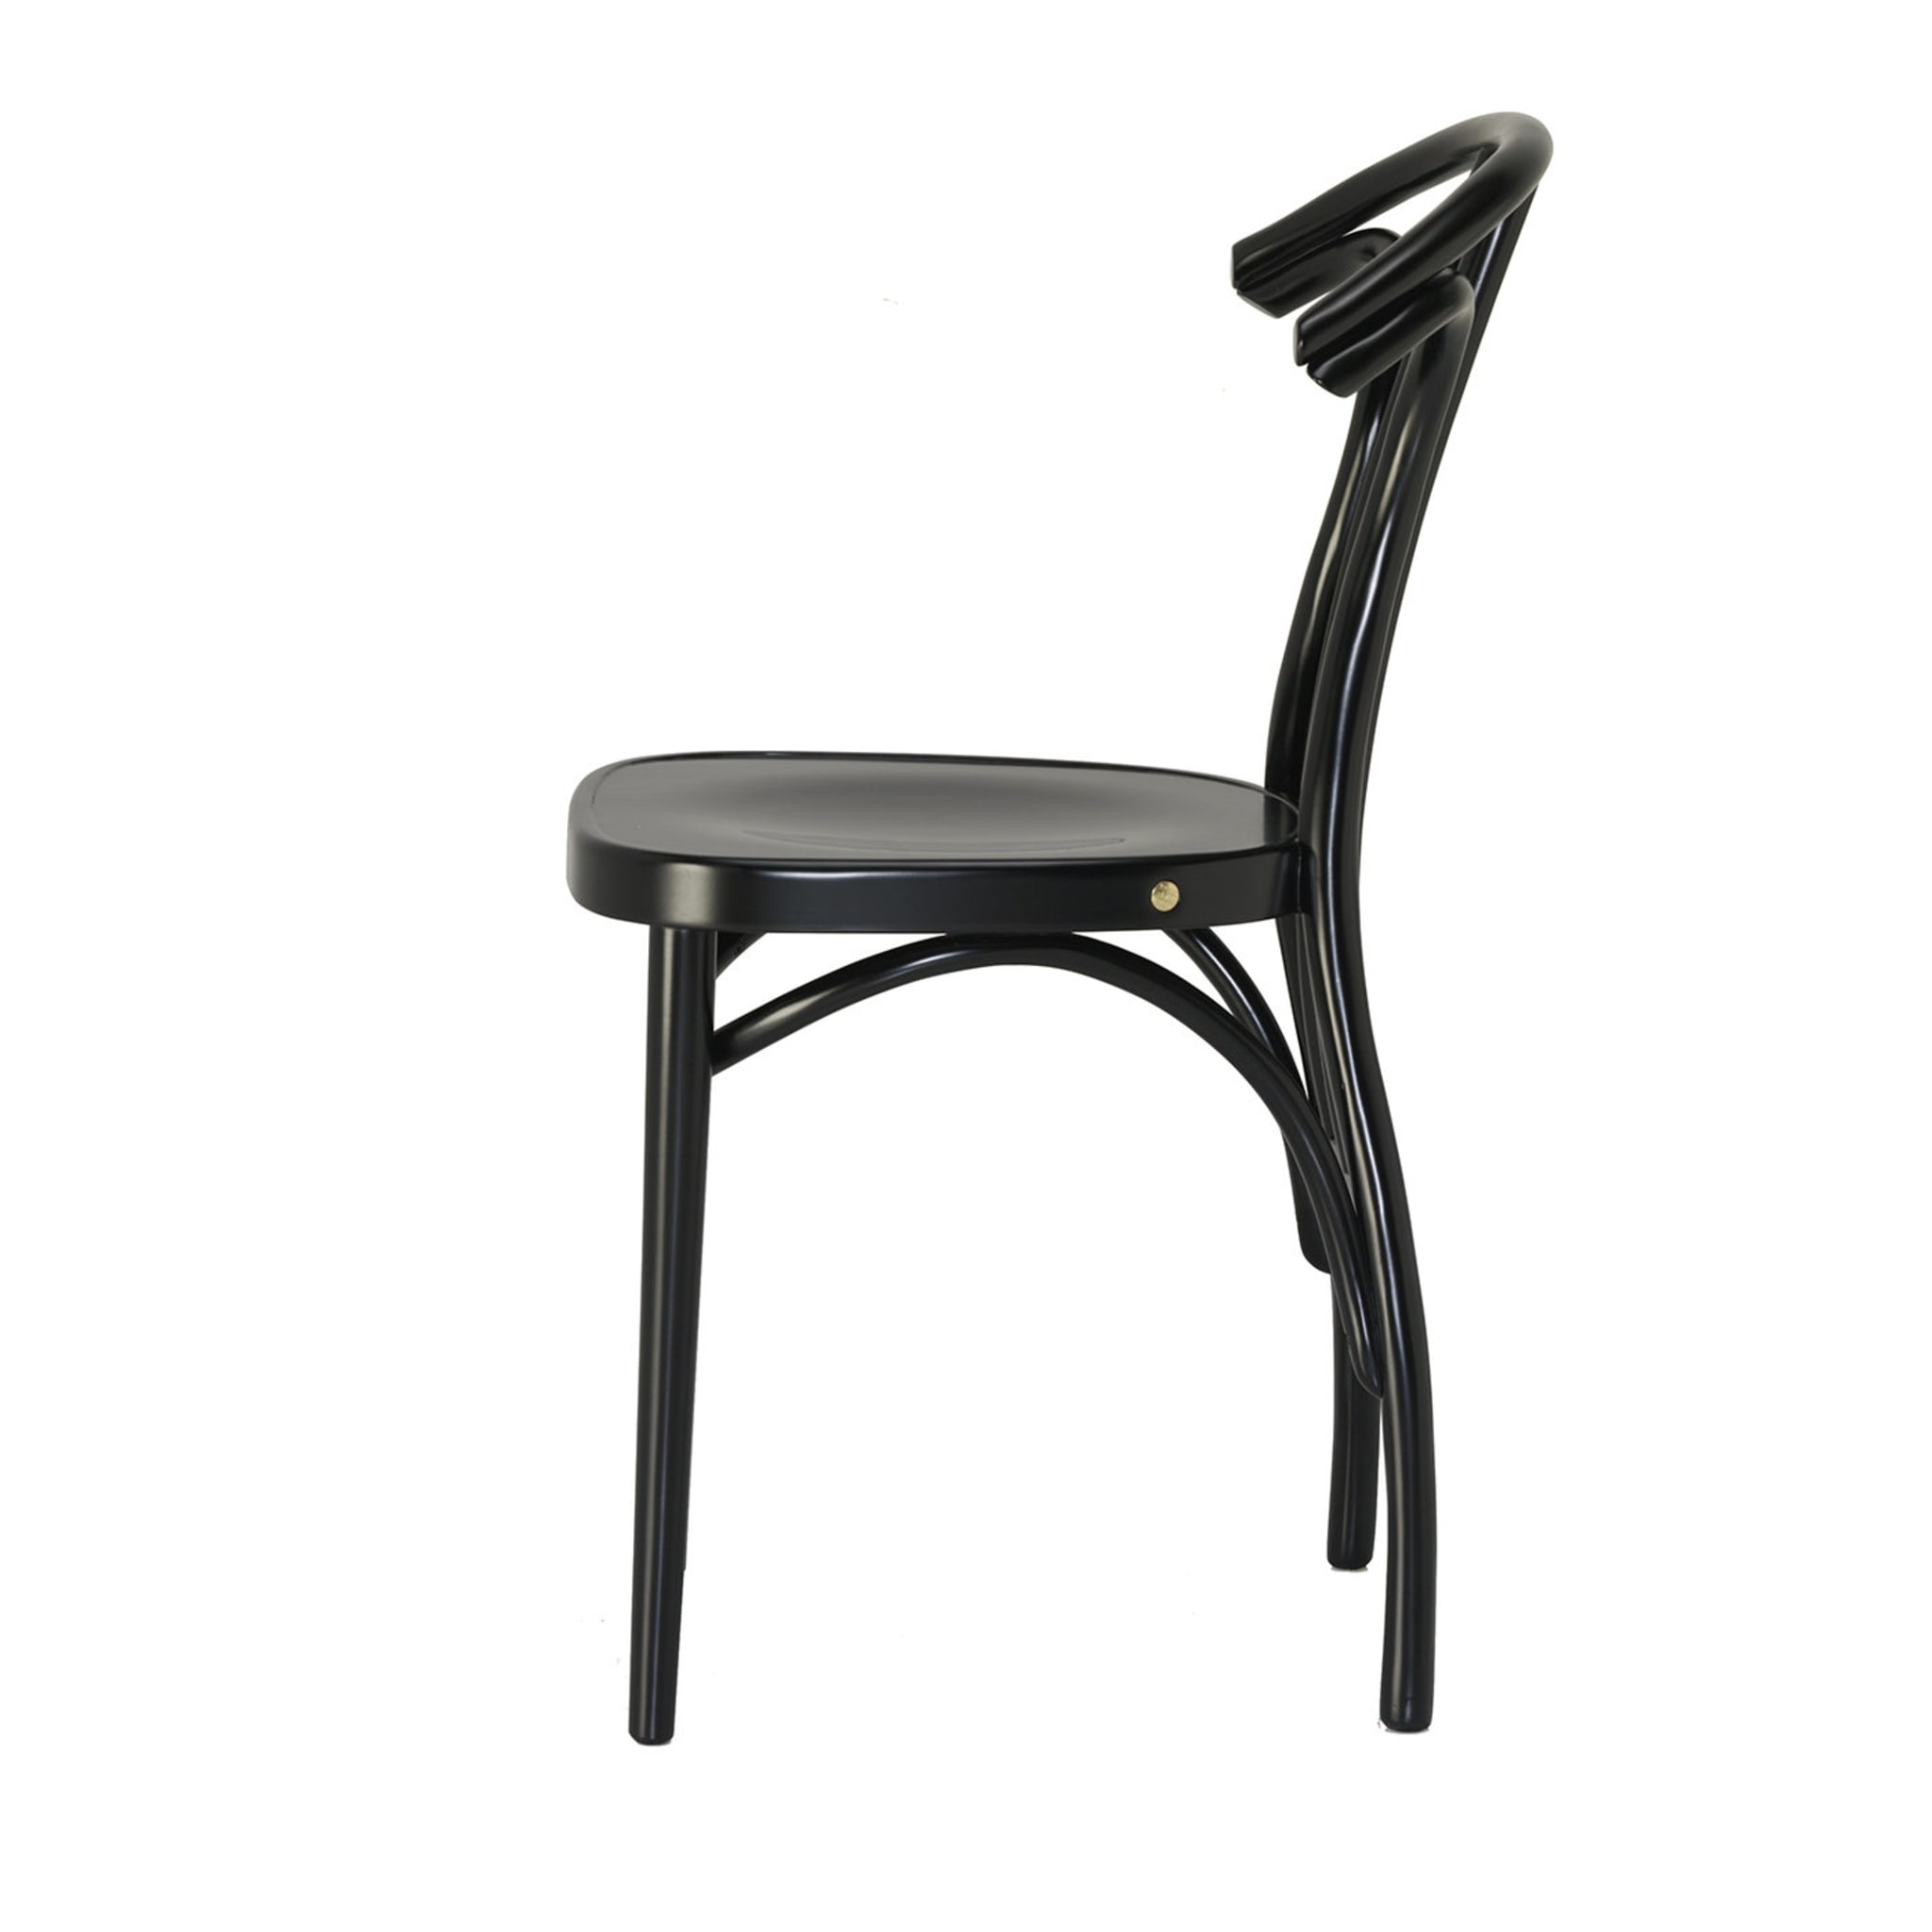 Radetzky Chair by Michele De Lucchi - Alternative view 1